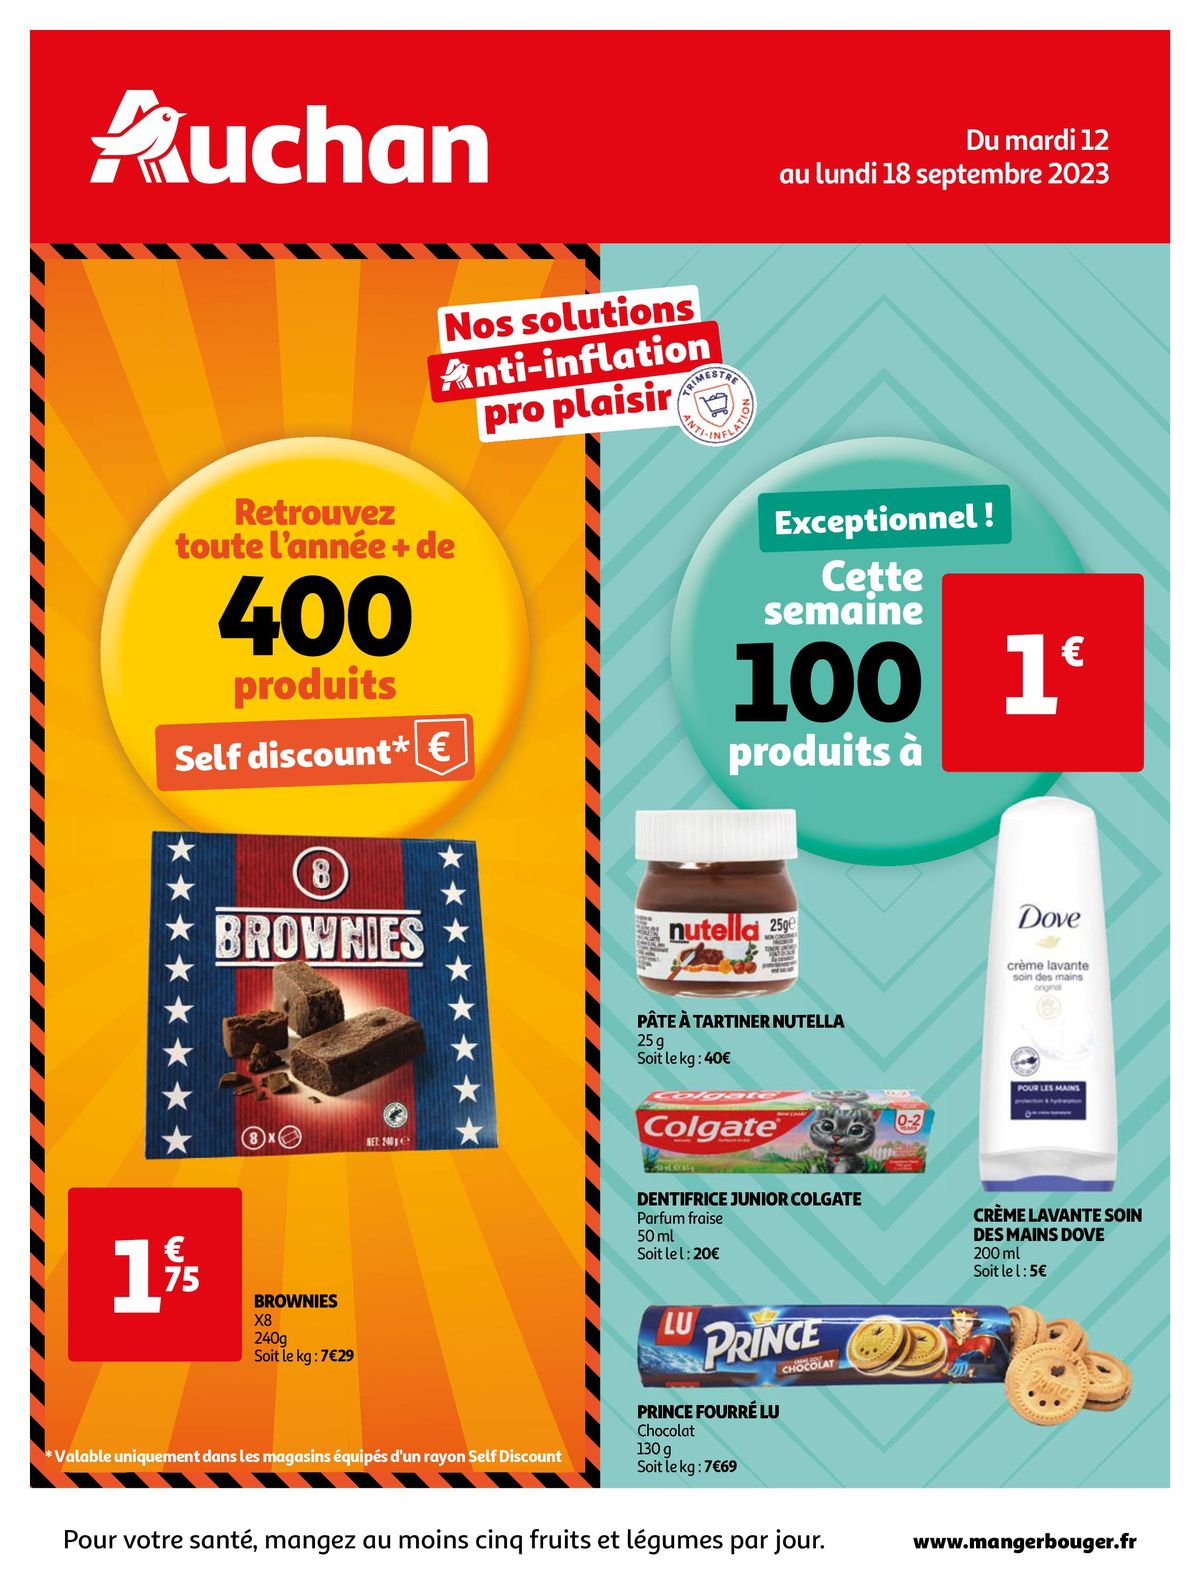 Catalogue Nos offres self discount !, page 00001